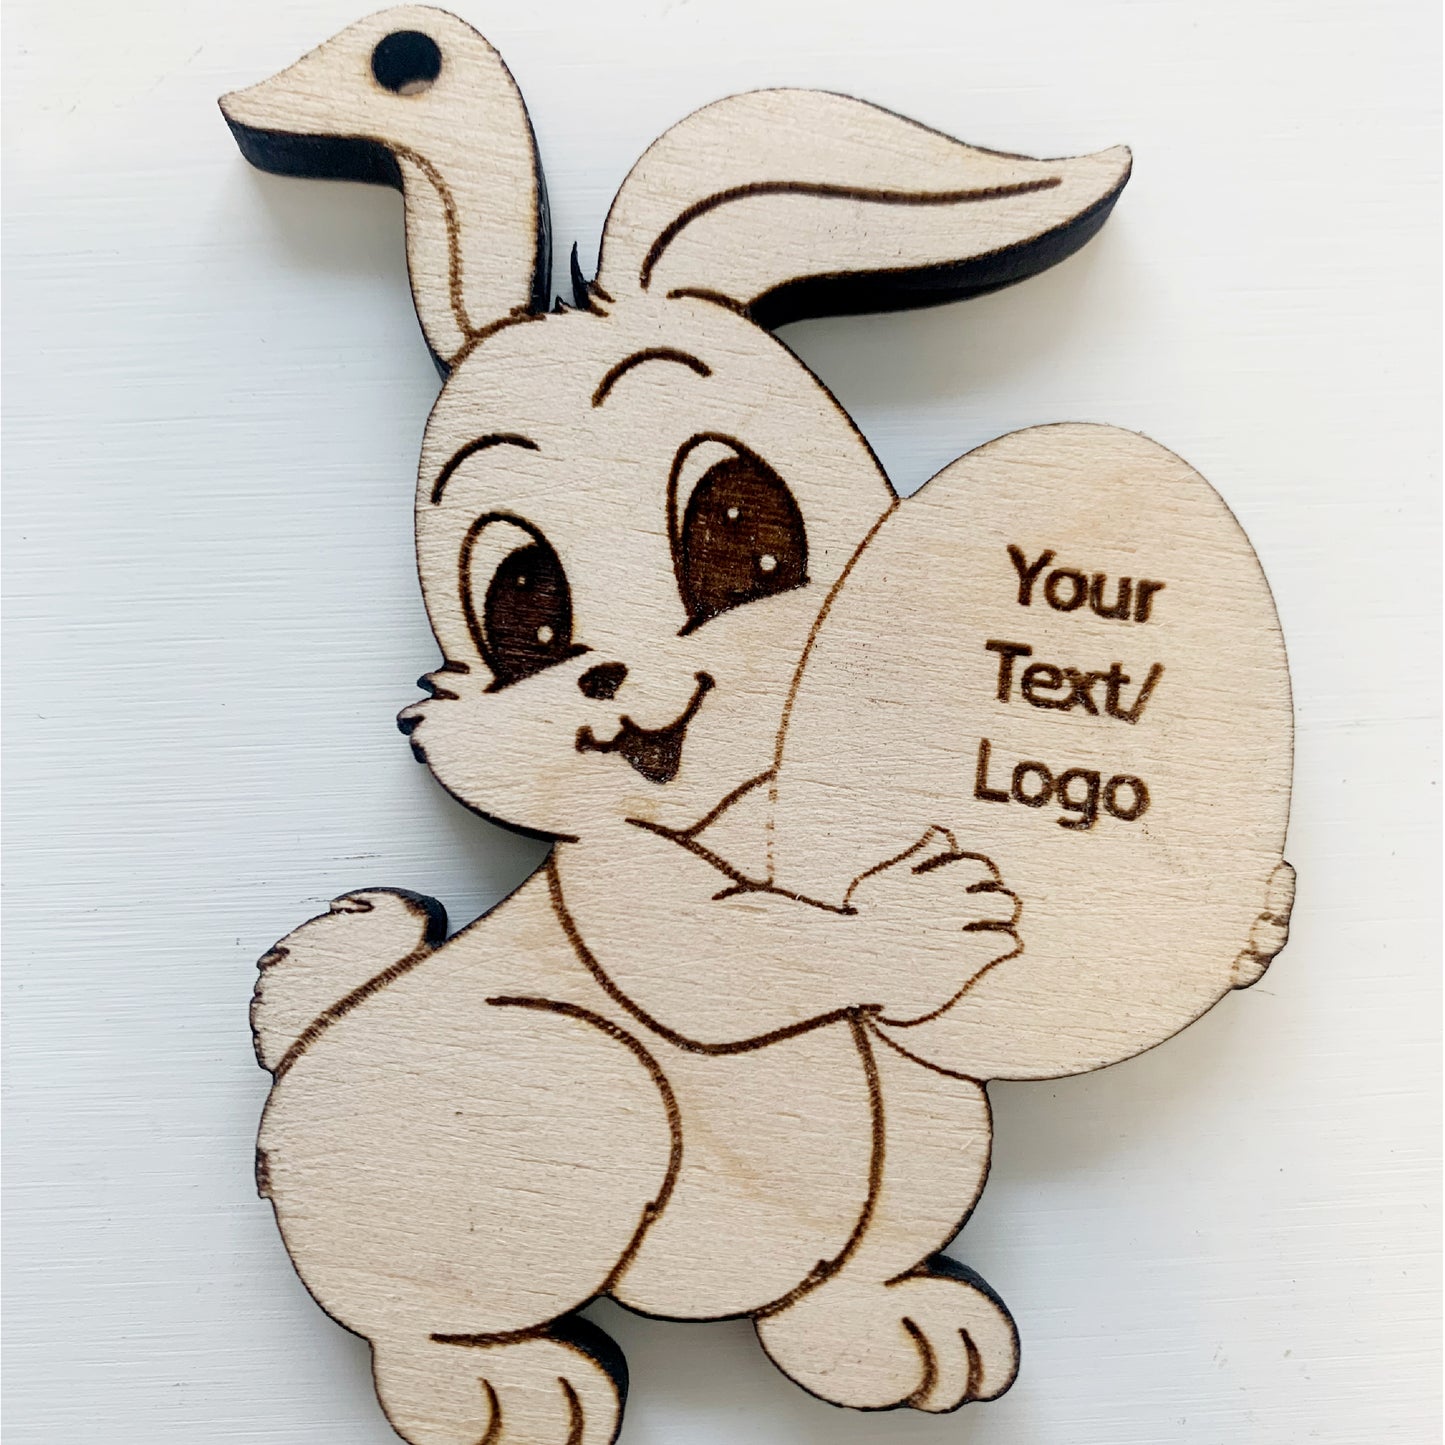 Easter gift tags, Wooden Easter tags, Easter basket decorations, Easter craft supplies, Personalized Easter tags, Easter party favors